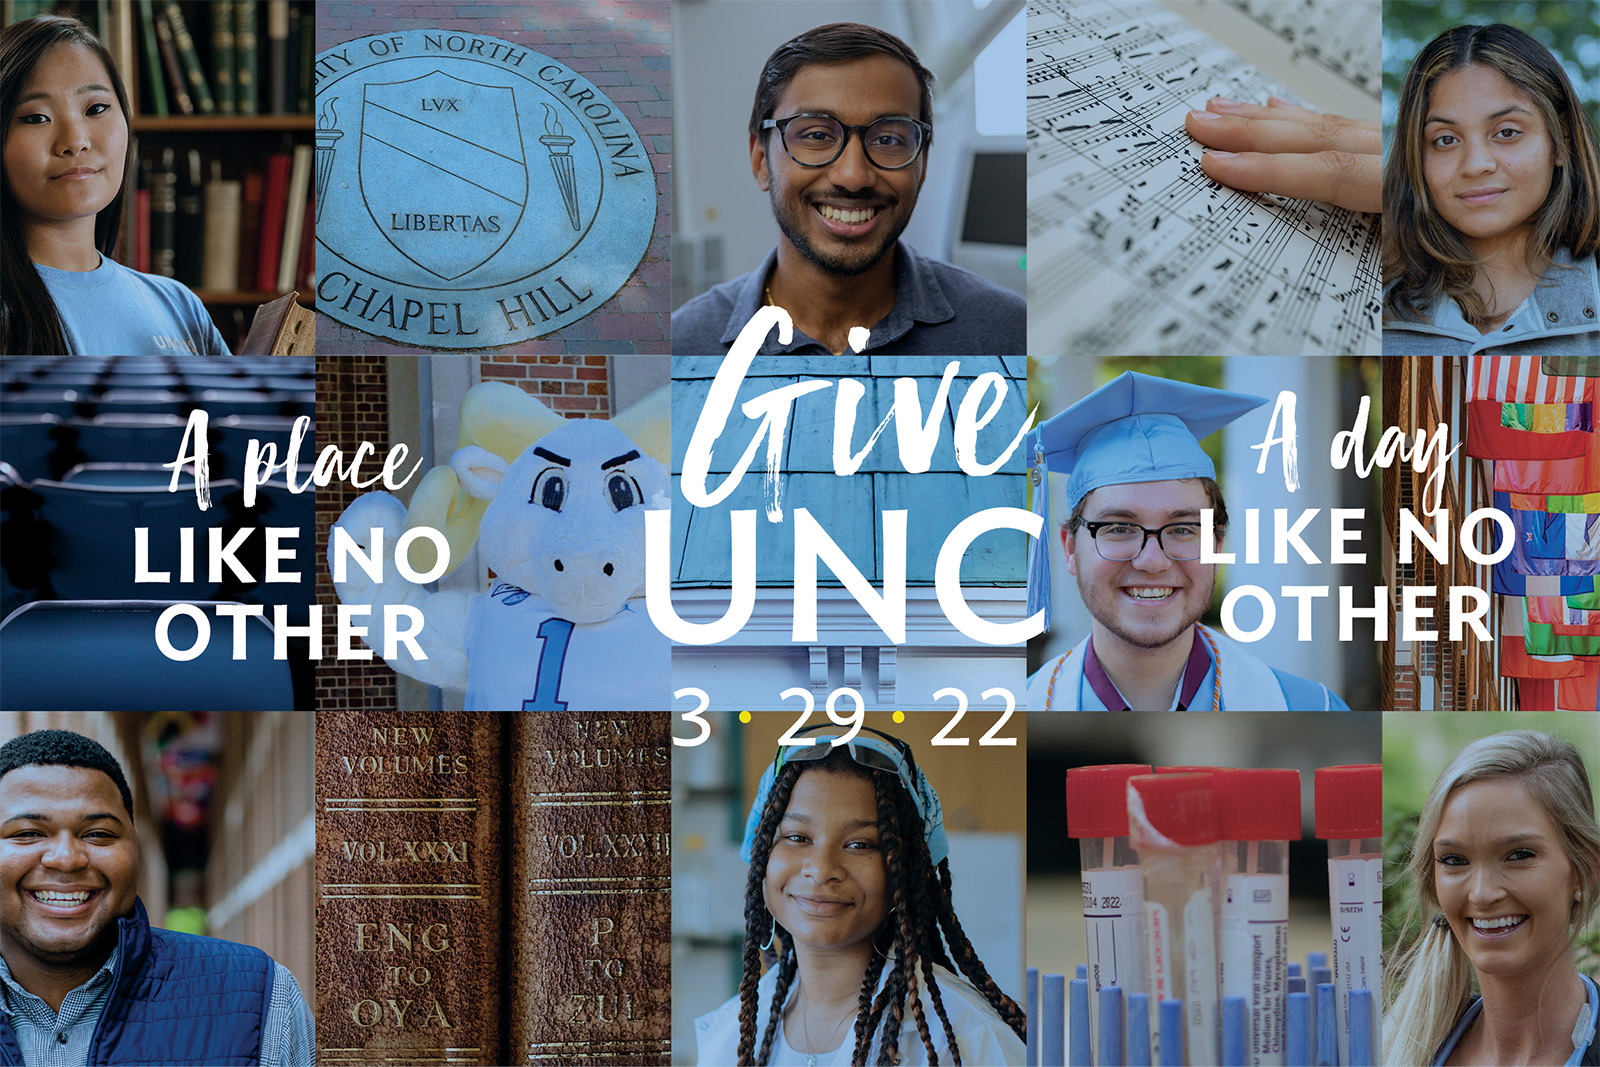 GiveUNC Day is March 29.